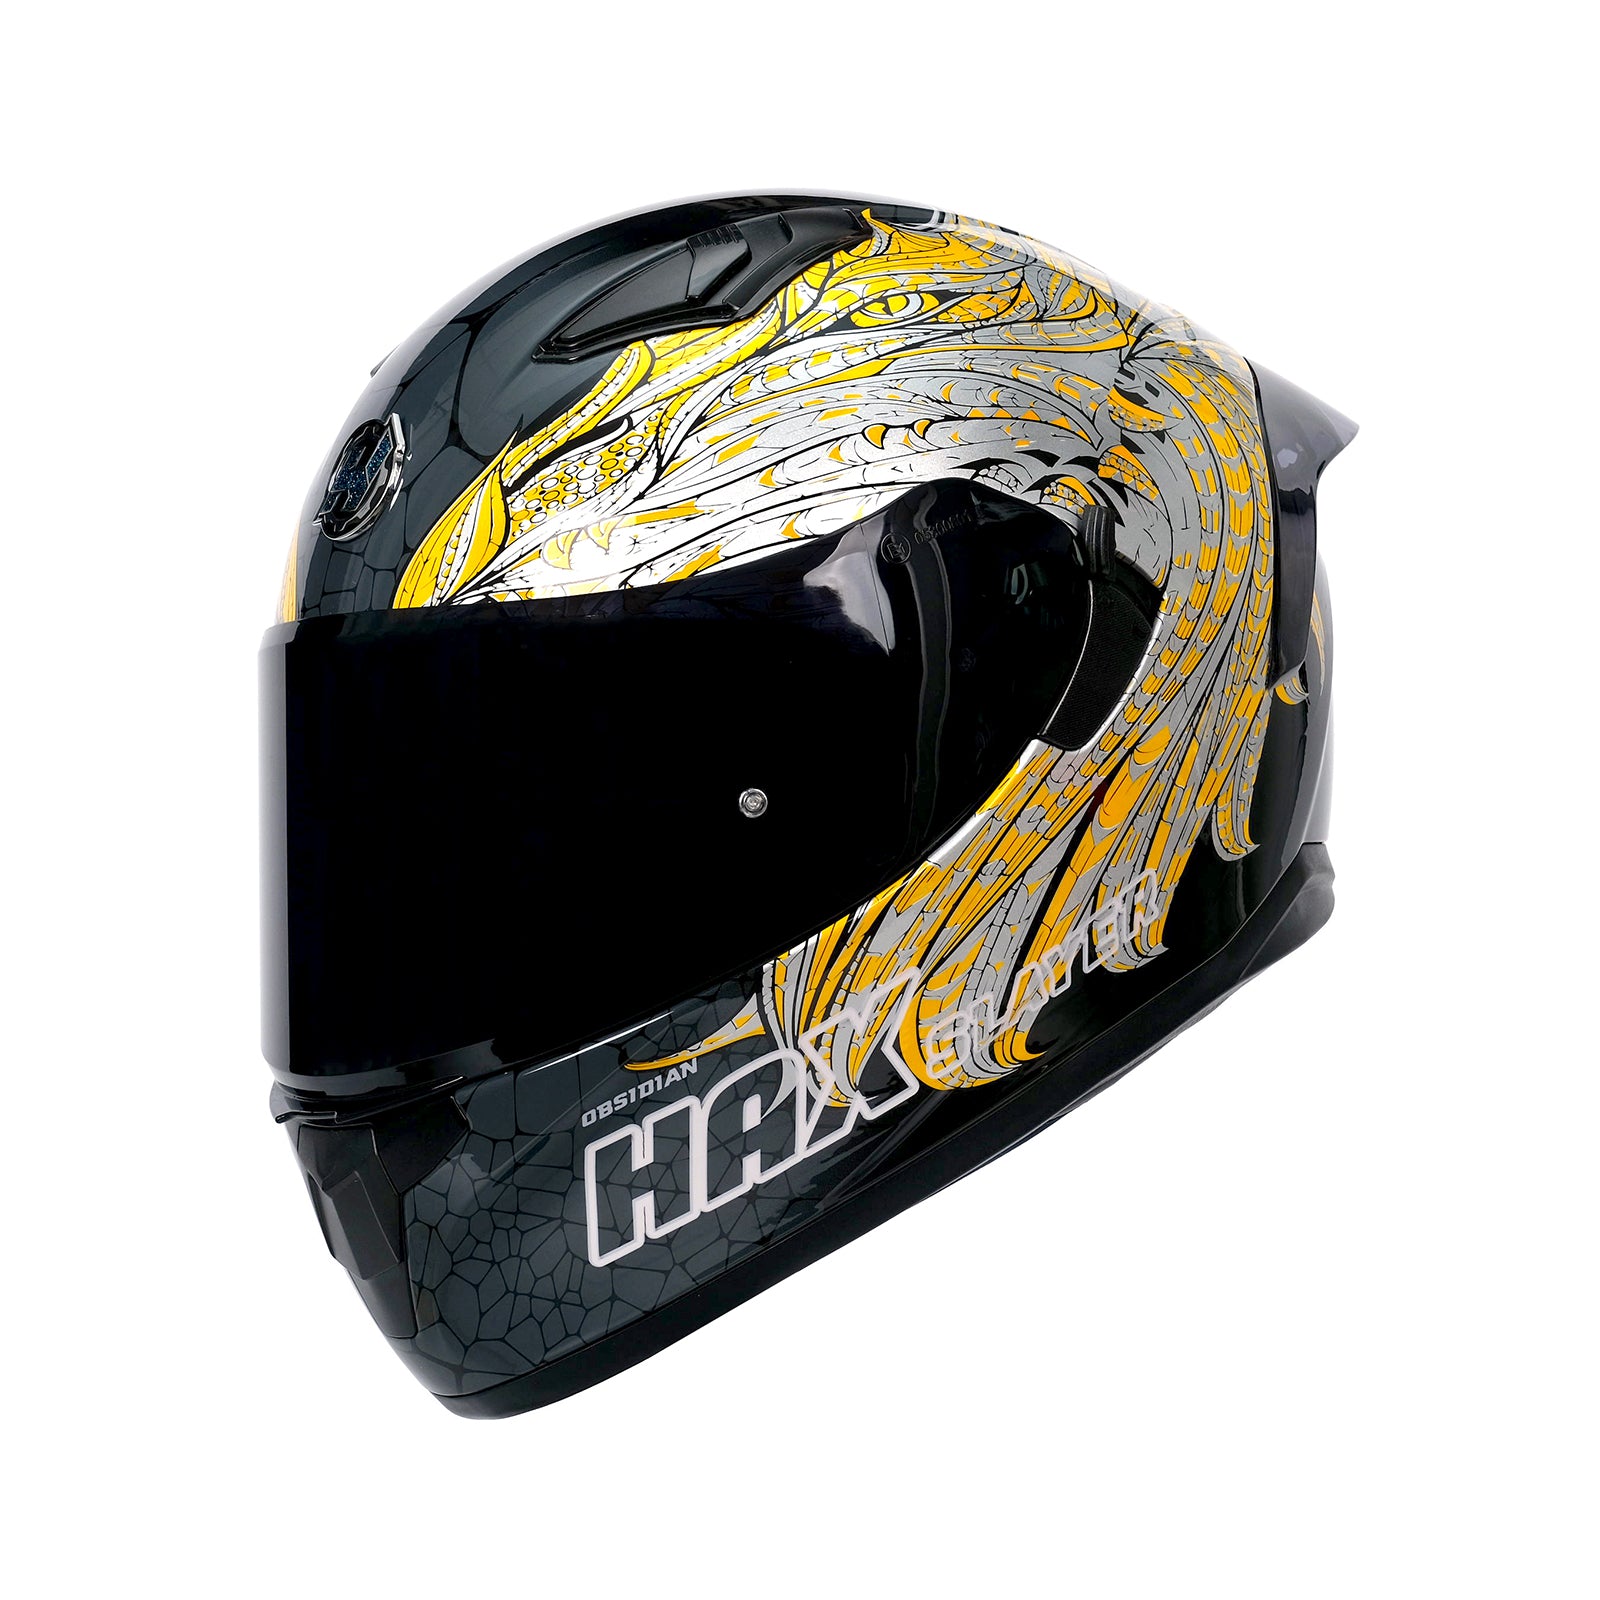 2023 AGV K1 S Full Face Street Motorcycle Riding Helmet - Pick Size & Color  - Helia Beer Co